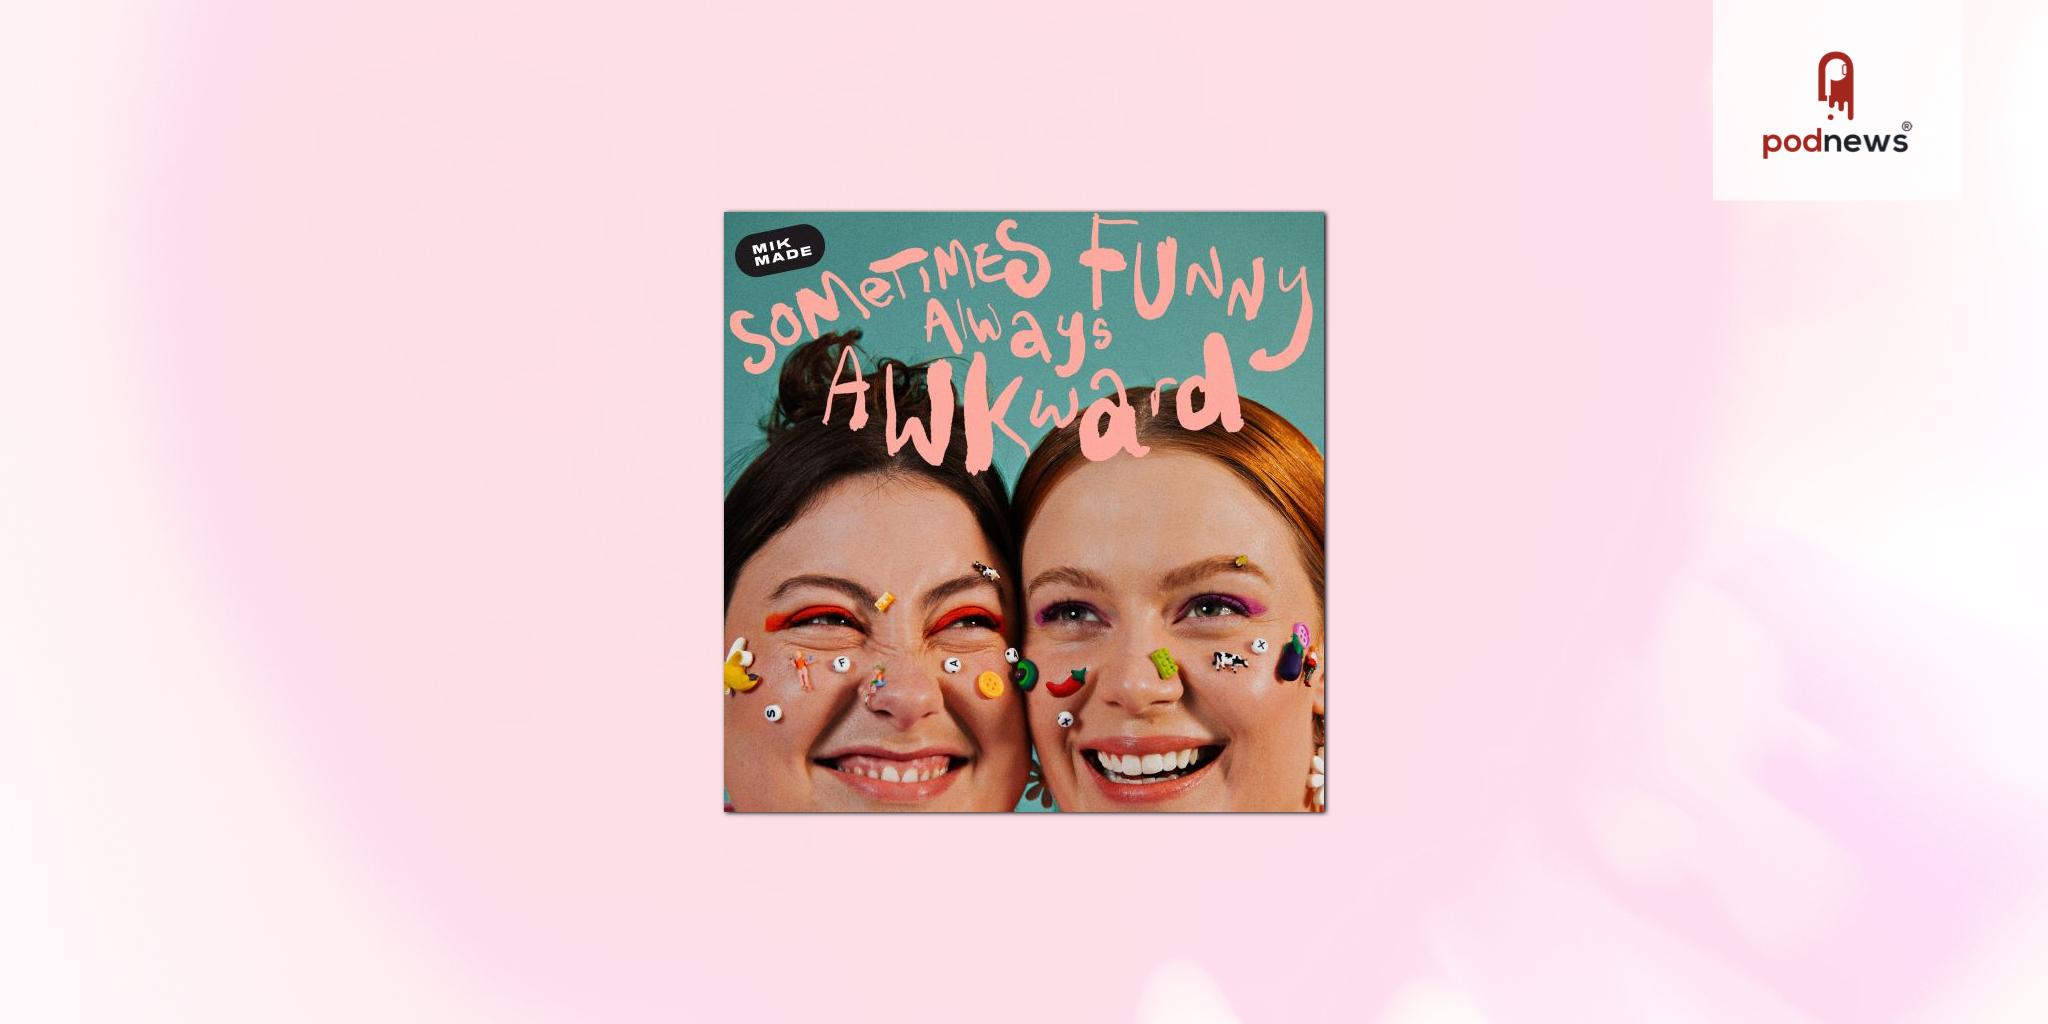 TikTok Sensation, Maddy MacRae, Launches Debut Podcast With DM Podcasts ‘Sometimes Funny Always Awkward’